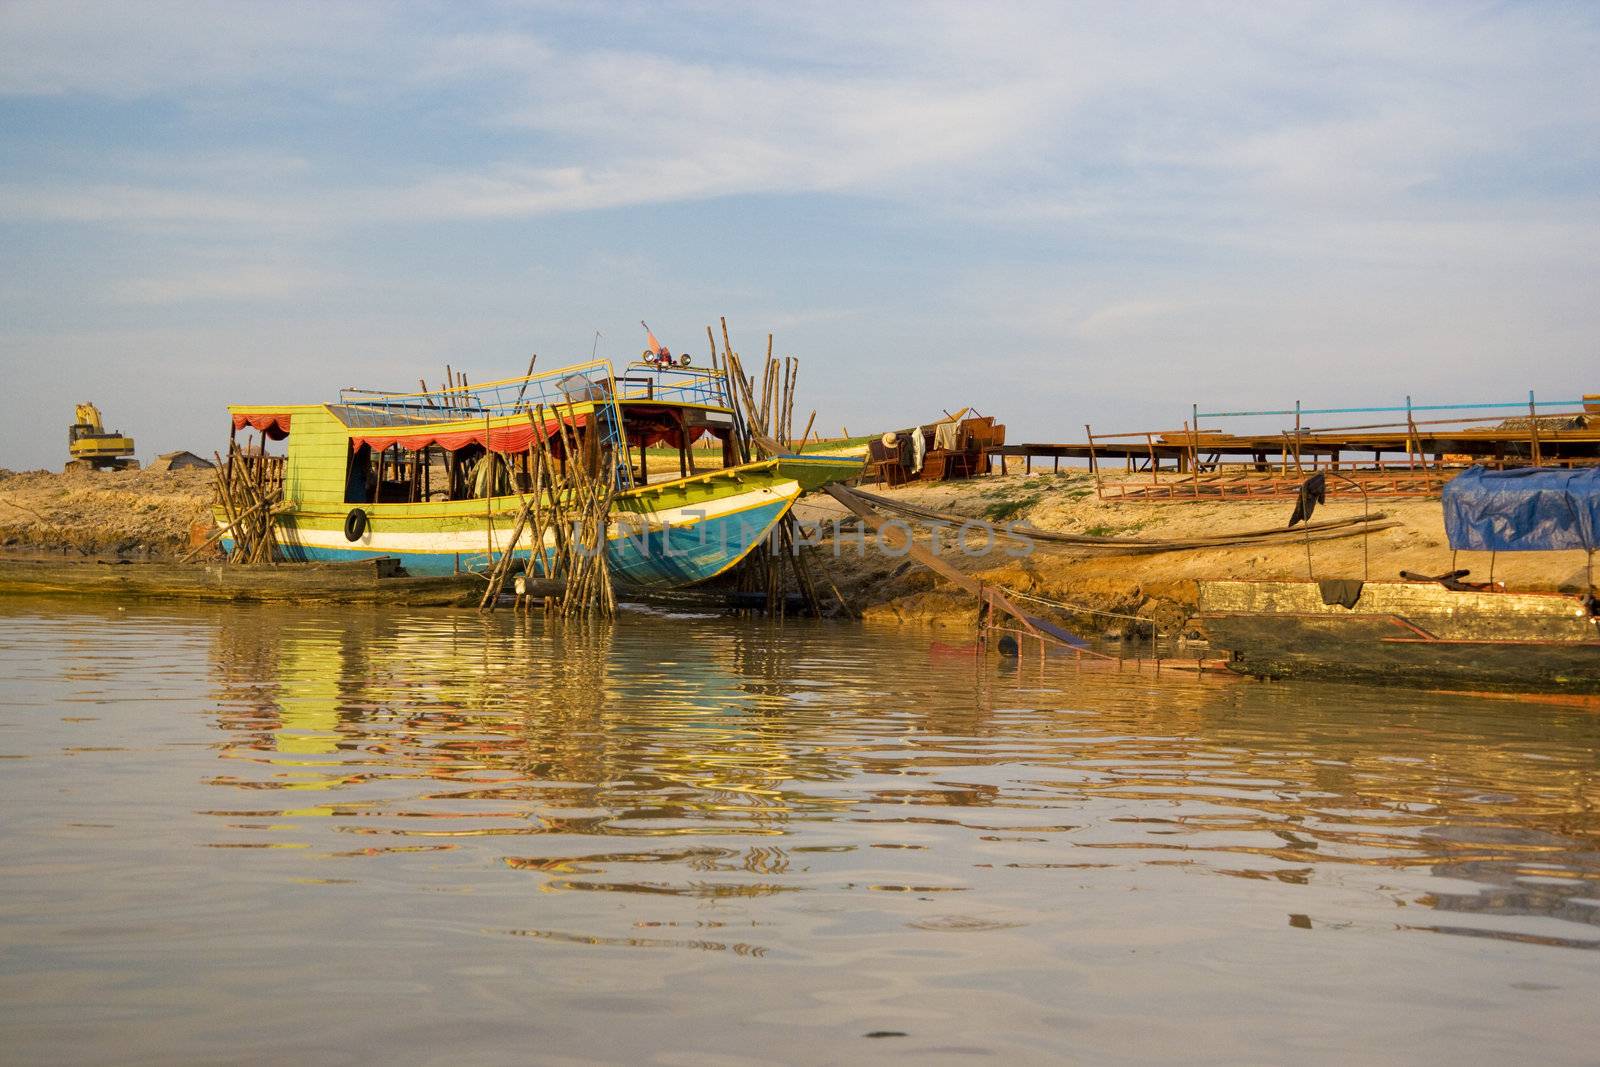 Image of a boat under repair at Chong Kneas river, located at the edge of the Tonle Sap Lake of Cambodia.